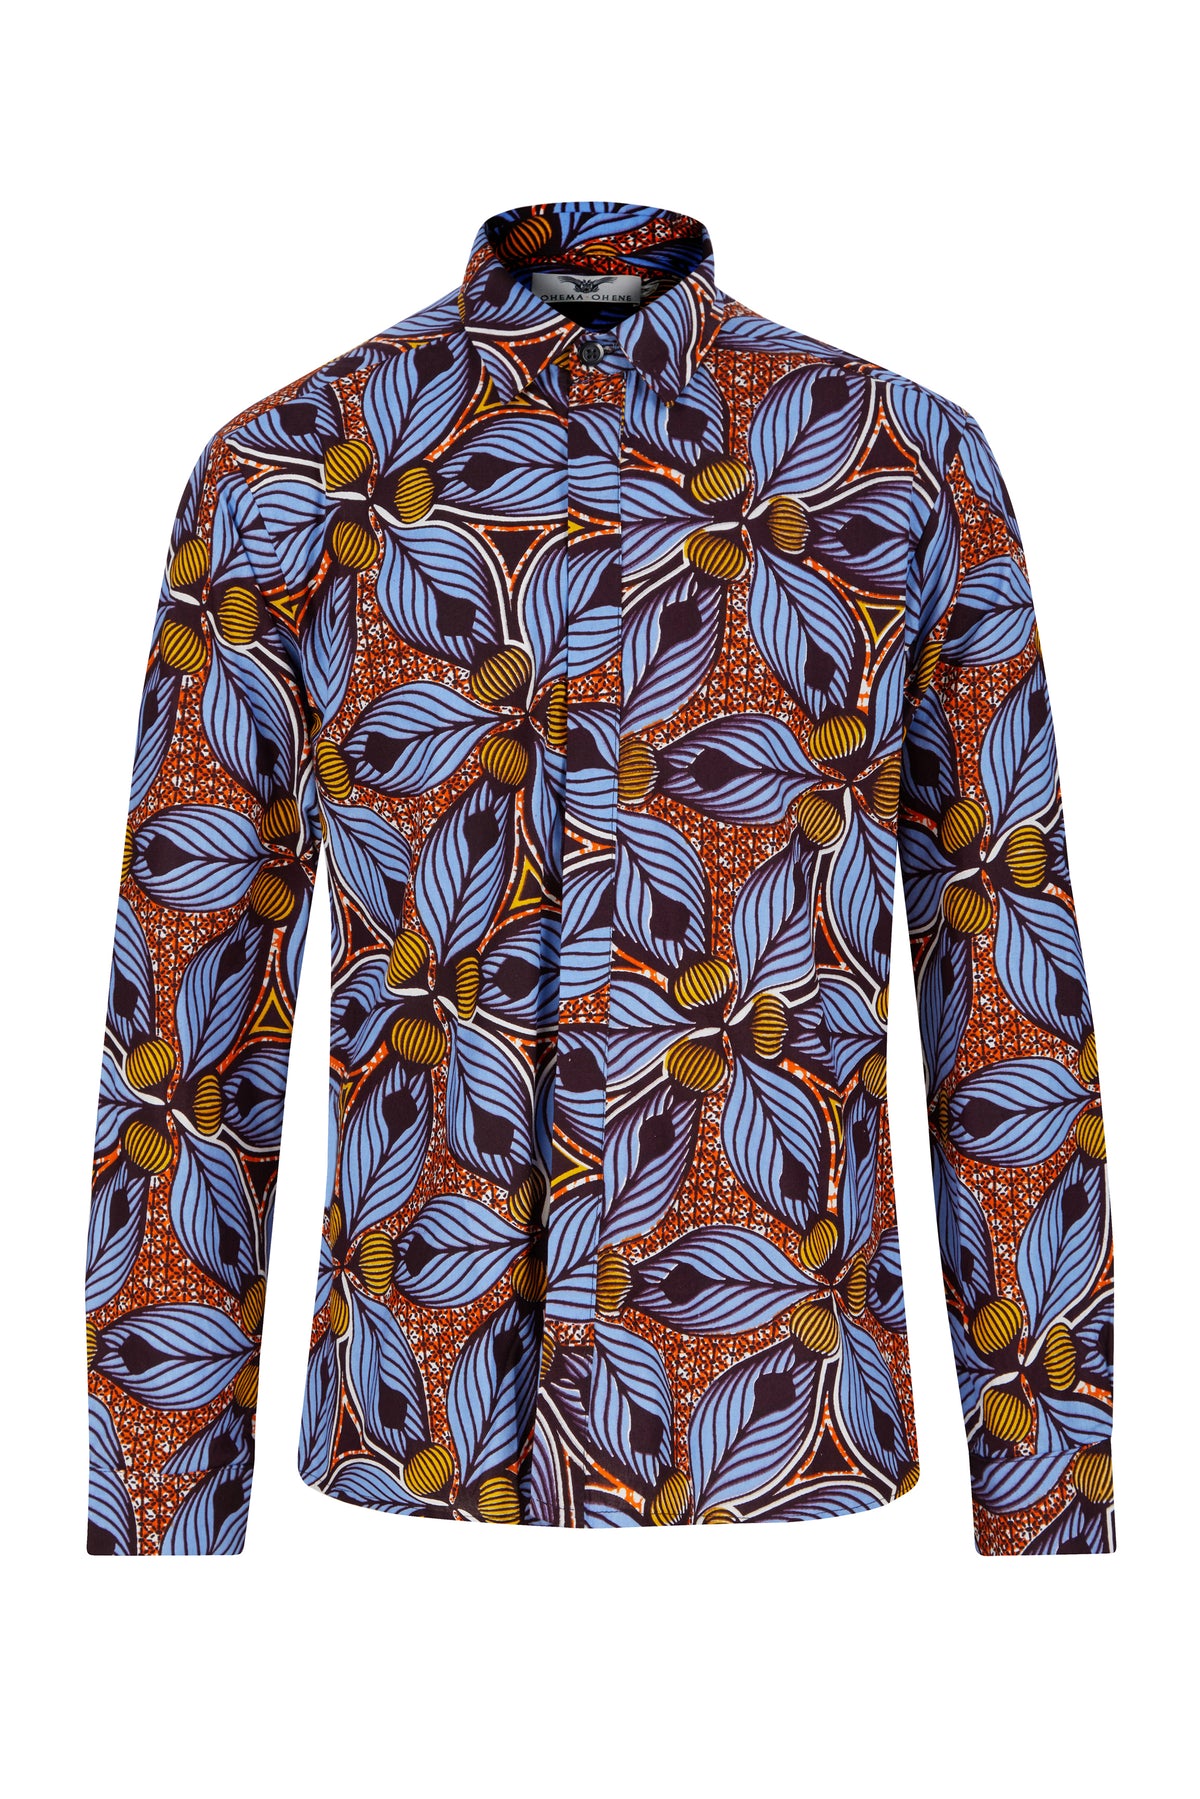 Long sleeve Tiger Lily African print shirt - OHEMA OHENE AFRICAN INSPIRED FASHION